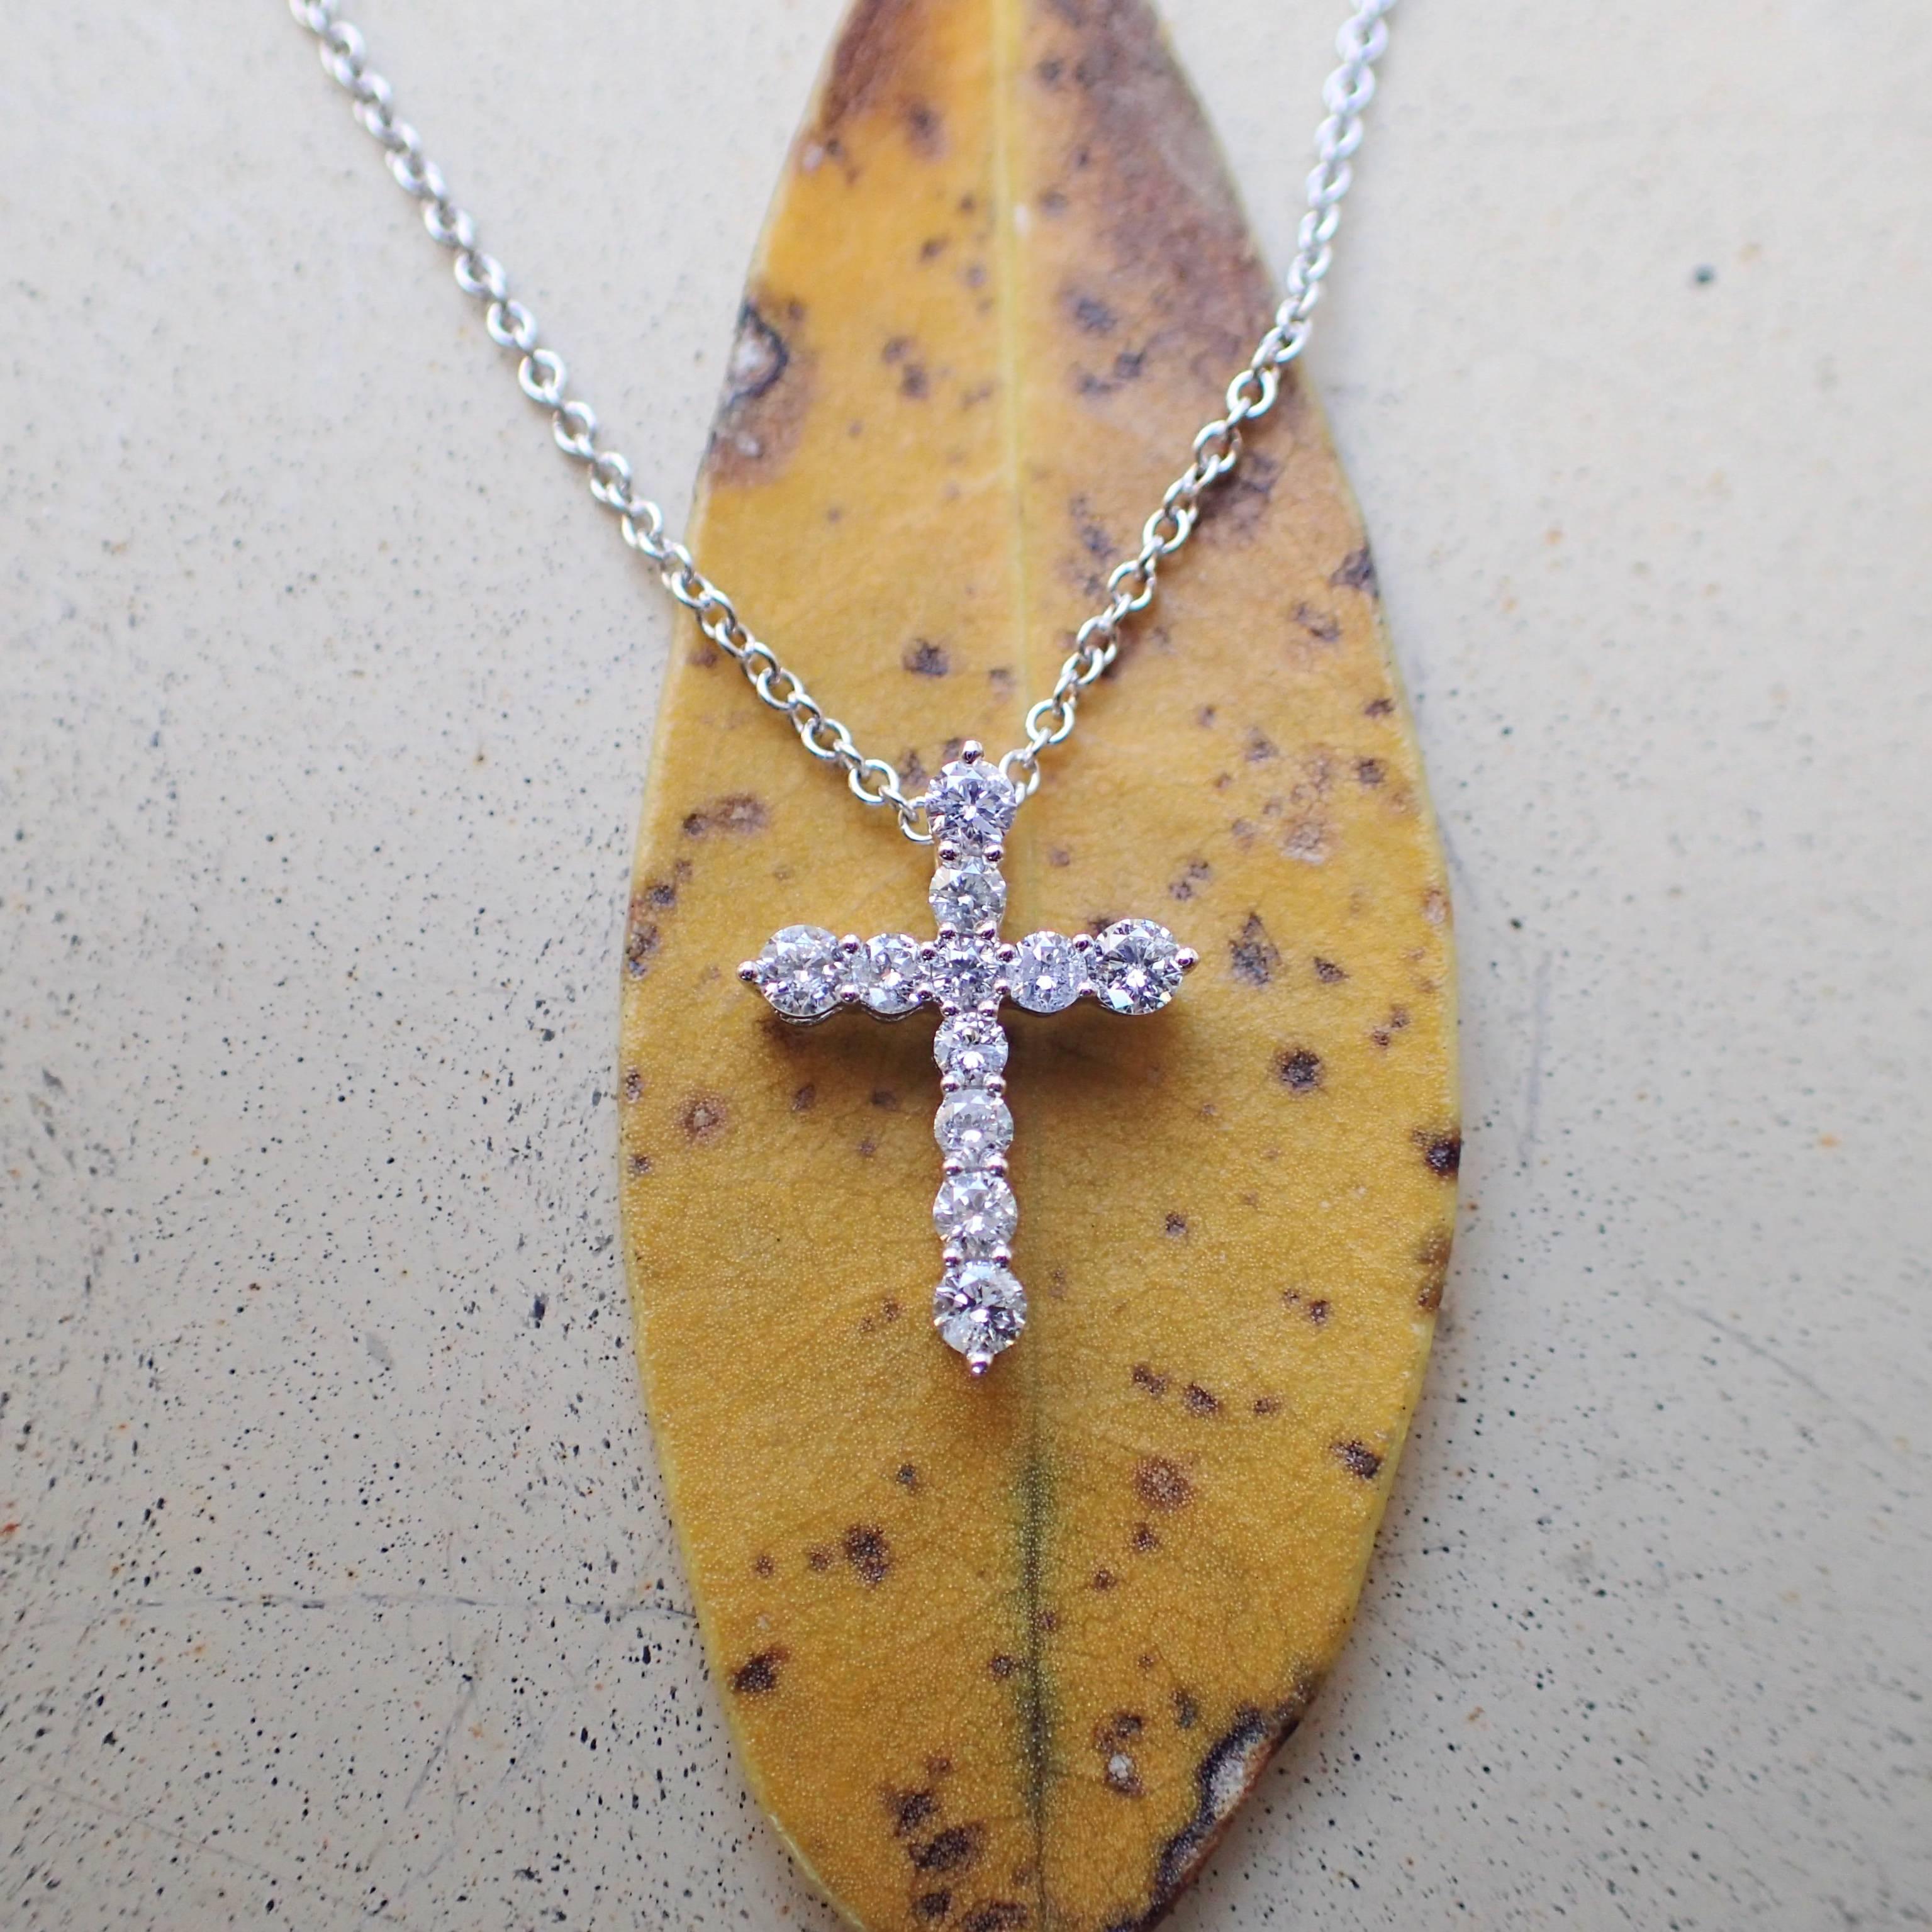 18k white gold thin cross with eleven (11) Round Brilliant Cut diamonds weighing a total of 0.247 carats with Color Grade G and Clarity Grade VS. The cross weighs 0.38 grams. The cross measures 13.36mm in length and 9.8mm in width. The cross hangs